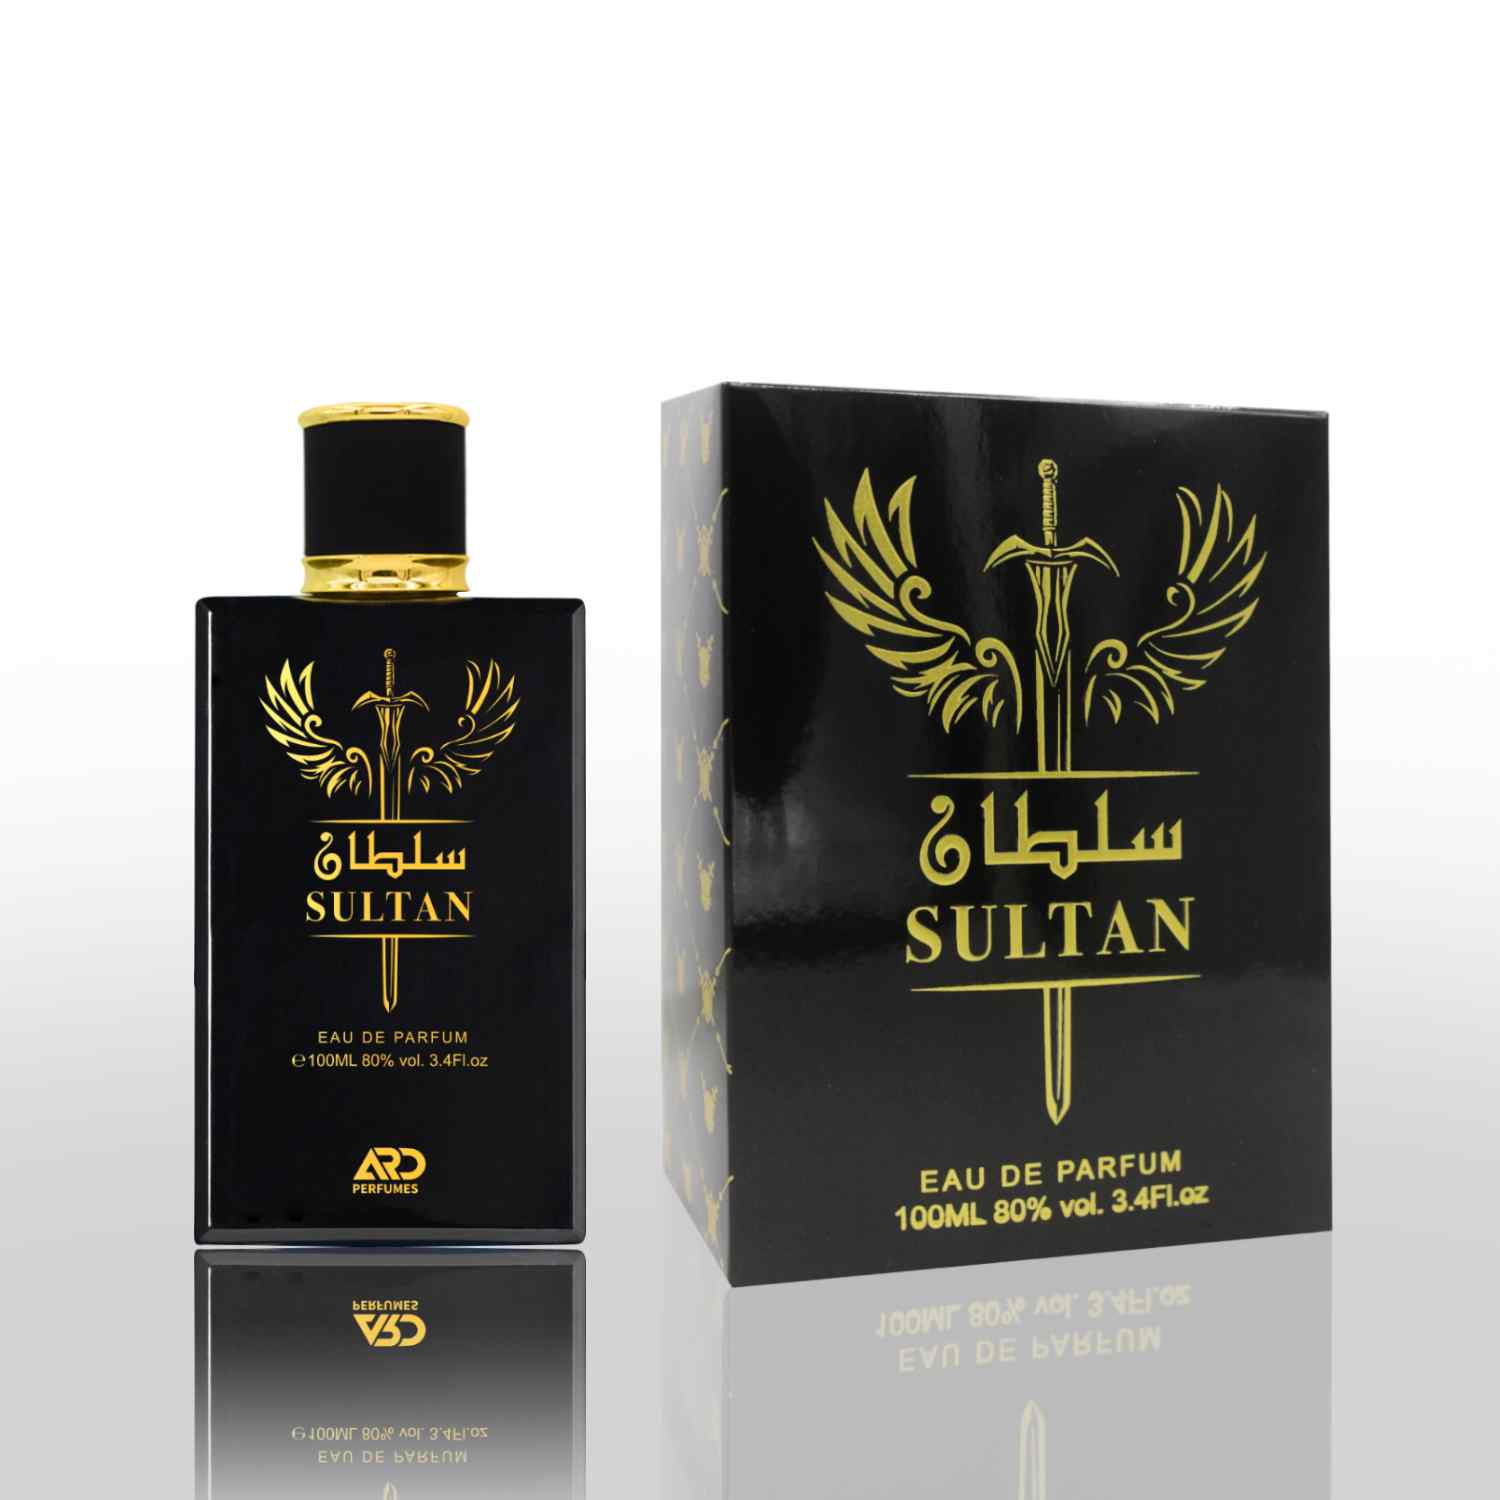 Sultan Perfume by ARD Perfumes and it is best perfume in low price